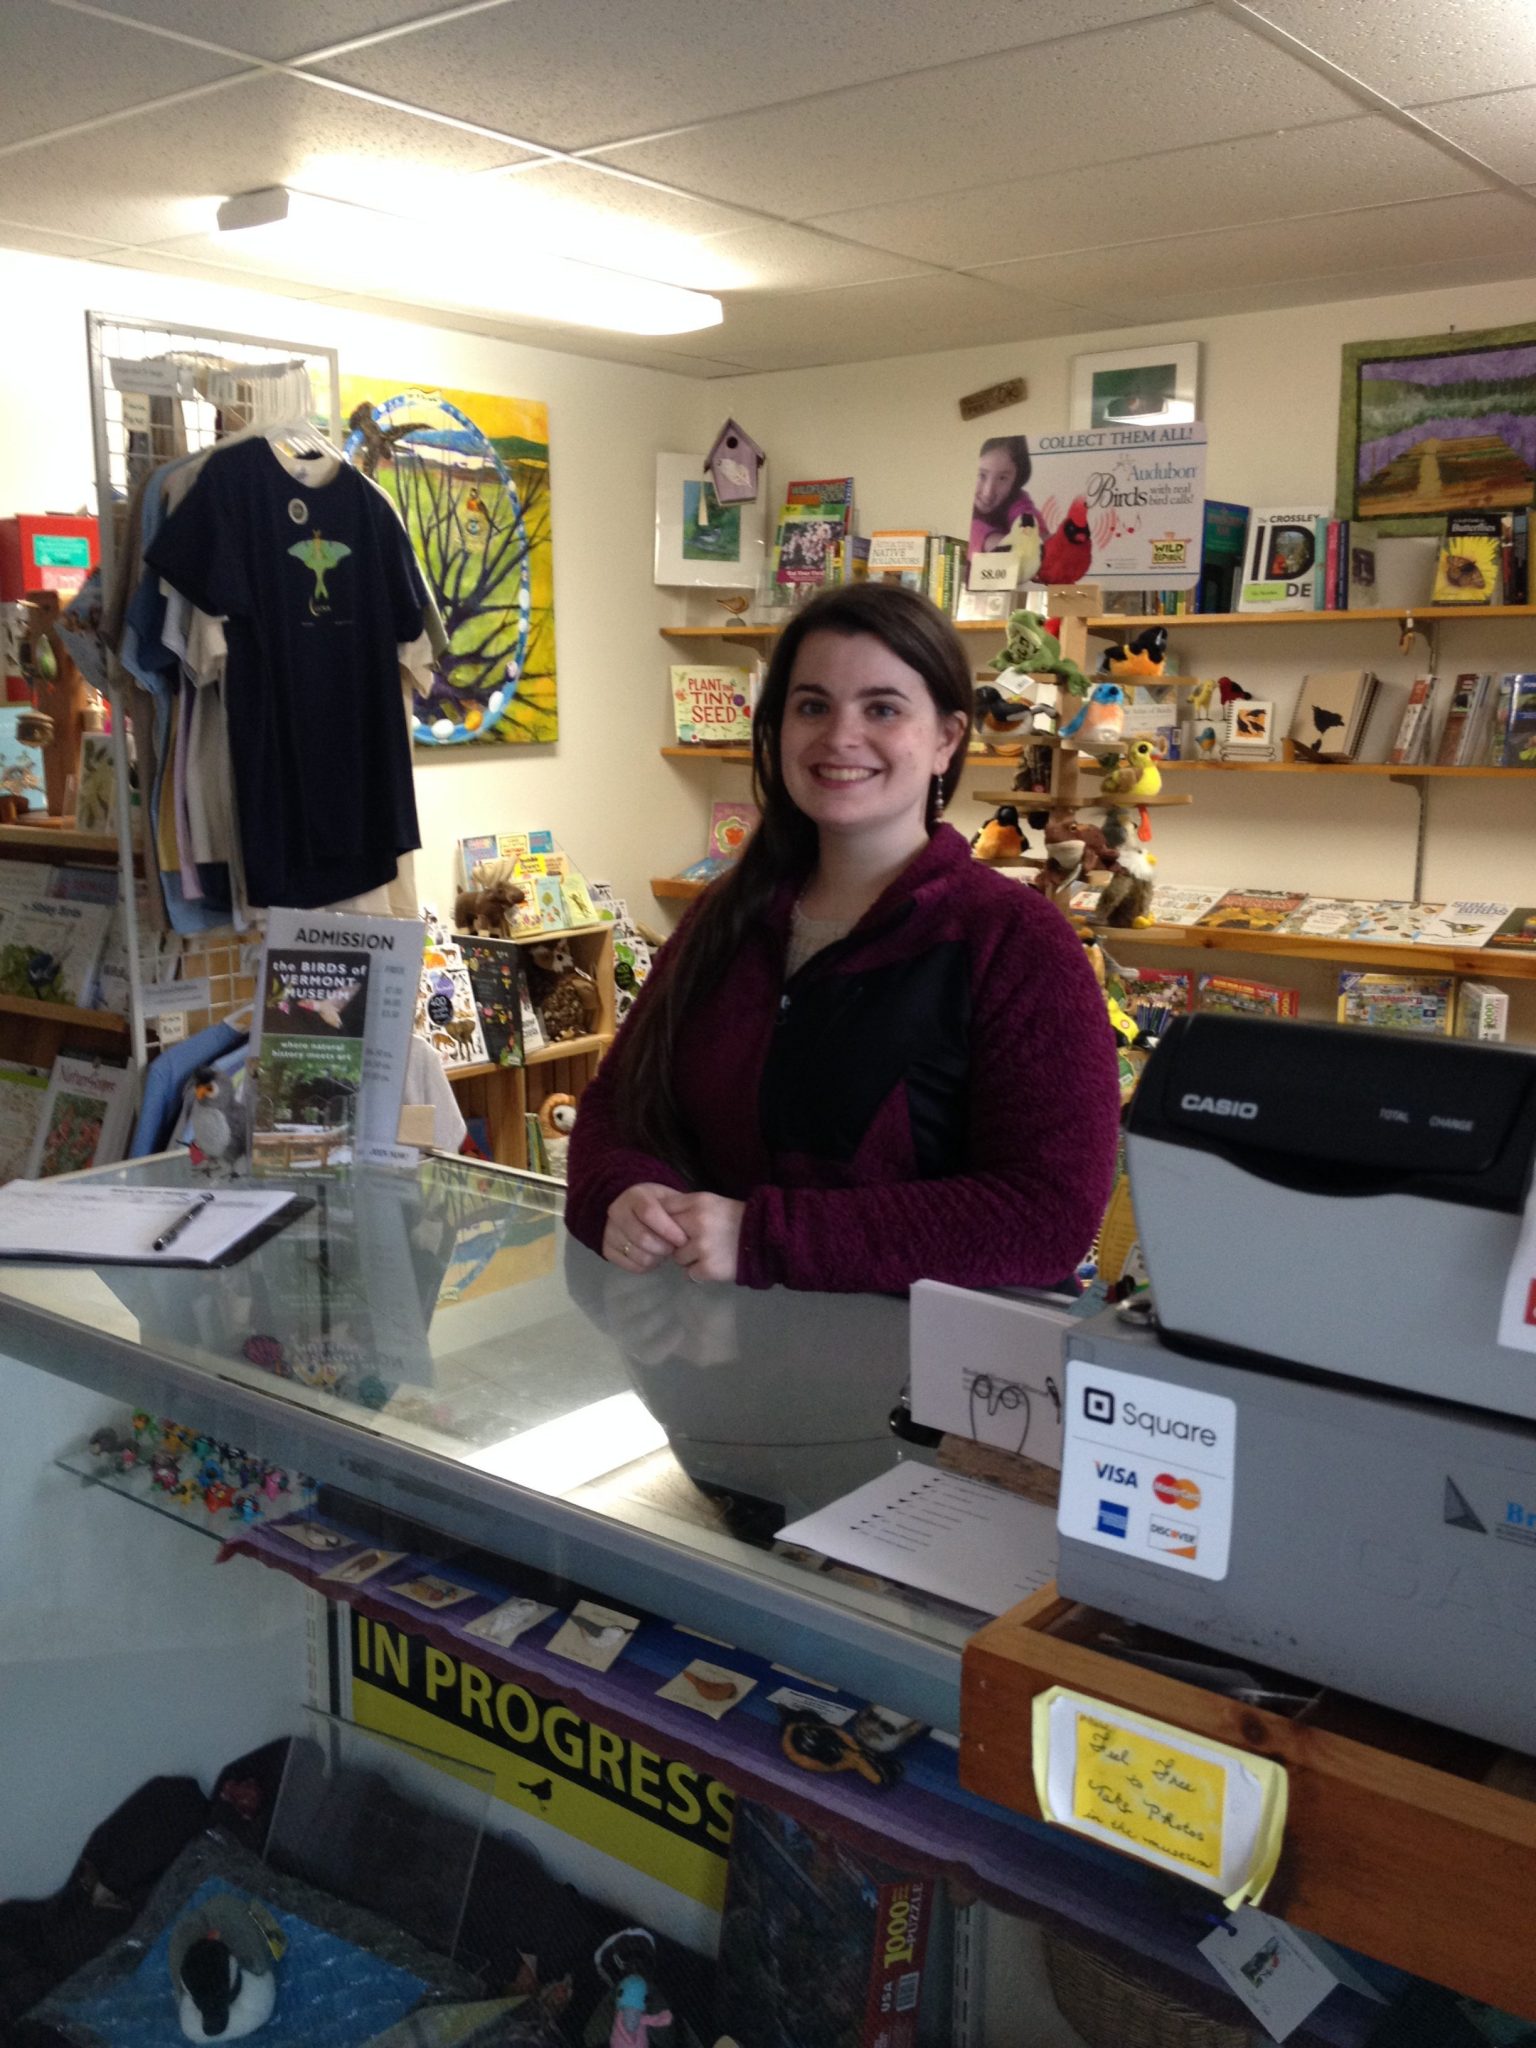 A smiling woman at the Museum's front desk with the gift shop behind her.